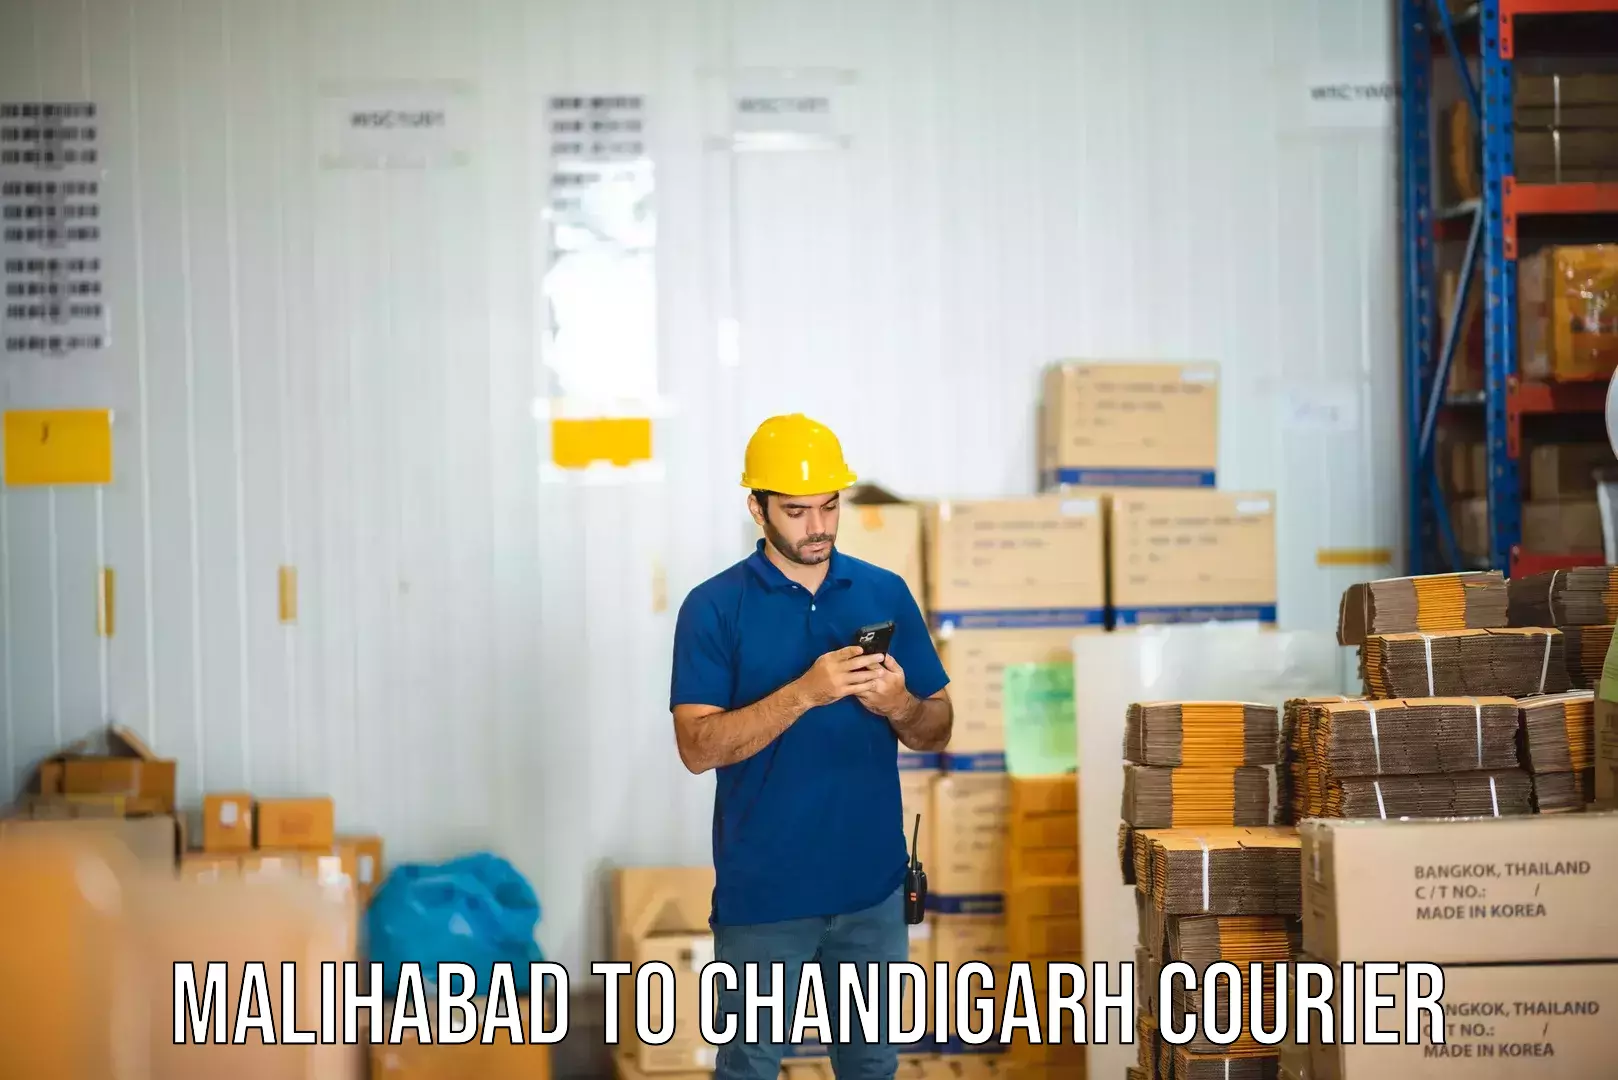 International courier networks Malihabad to Chandigarh